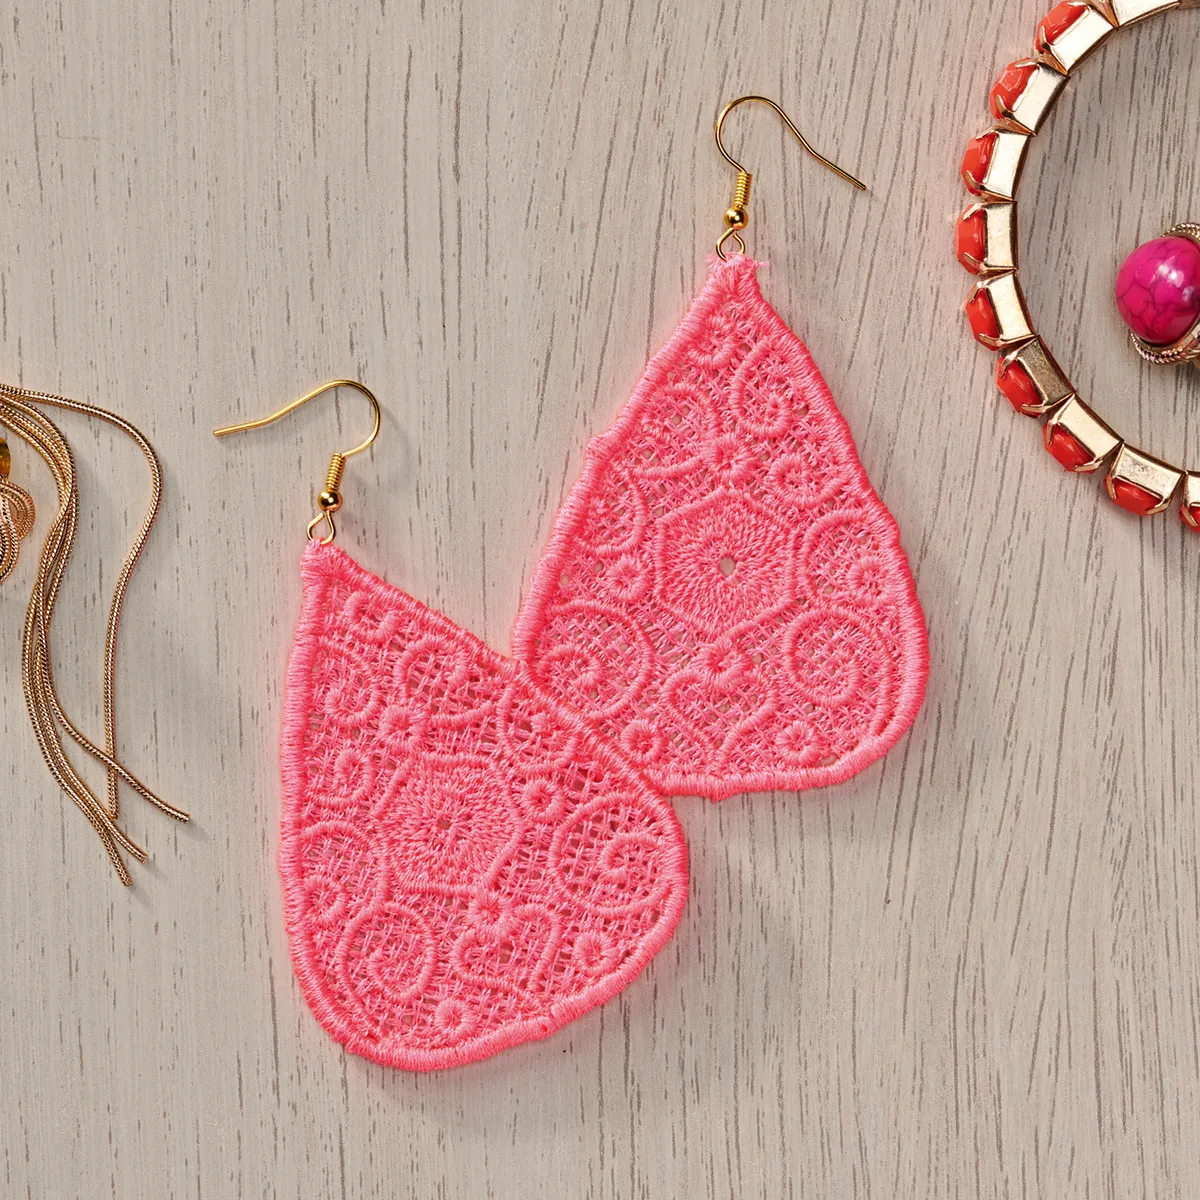 Lace earrings Love Embroidery issue 15